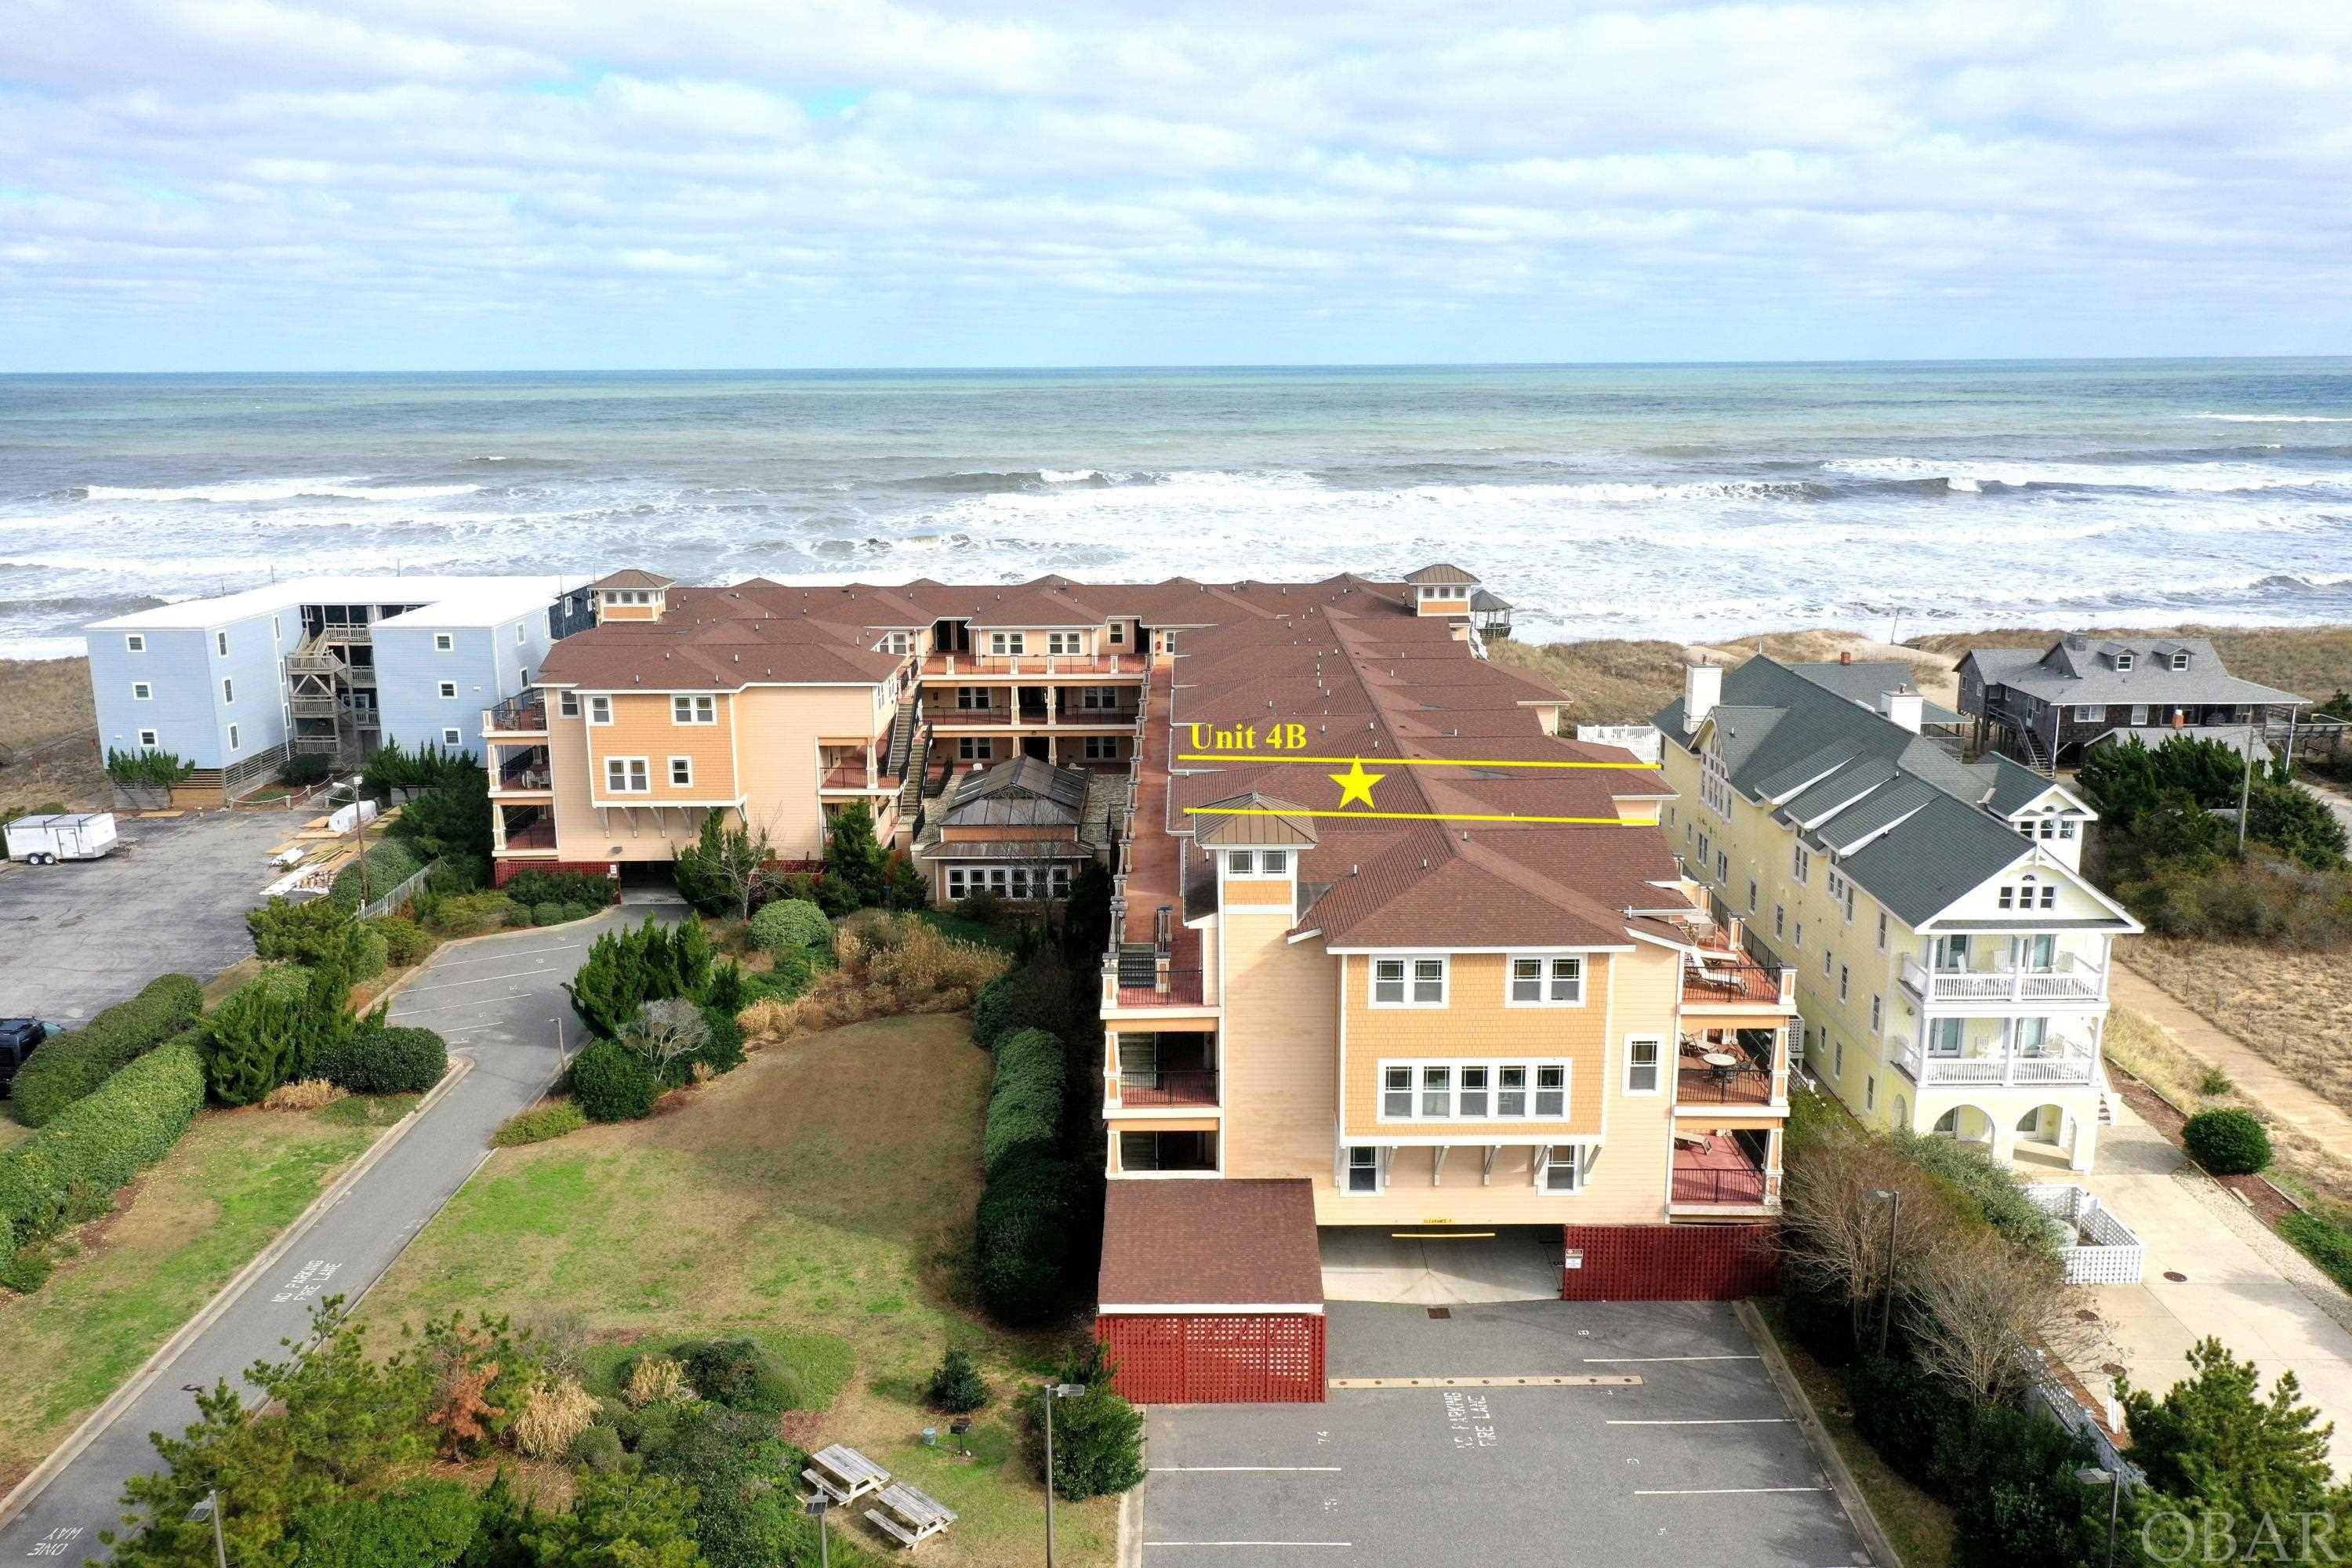 This 3-bed, 3-bath, top floor unit offers everything you need for luxury oceanfront living. The unit resides at The Croatan Surf Club, an ultra-luxury resort condominium community here on the Outer Banks. You will enter into a large, one-level living space with vaulted ceilings that drench the condo with natural light. The open kitchen is complete with granite countertops, custom cabinetry, stainless steel appliances, and an eat-in bar. Entertaining guests? Not a problem, with the open floor plan into the greatroom and dining areas completely with hardwood floors. Step out onto the private balcony and relax on the rocking chairs with the partial oceanview. Don't forget the 2 master king bedrooms, one queen bedroom, all complete with custom tile baths and jetted tubs. Make sure you take the elevator down to access the expansive ocean front pool complex. The outdoor community area is complete with an 84' pool and separate children’s pool with spray ground, dune-top boardwalks, gazebo, shower sprays, and a highly vegetated adult spa area. That's not all! Indoor facilities include: a fitness center, heated pool, and spa with translucent tops. Don't miss out on this first-class establishment!